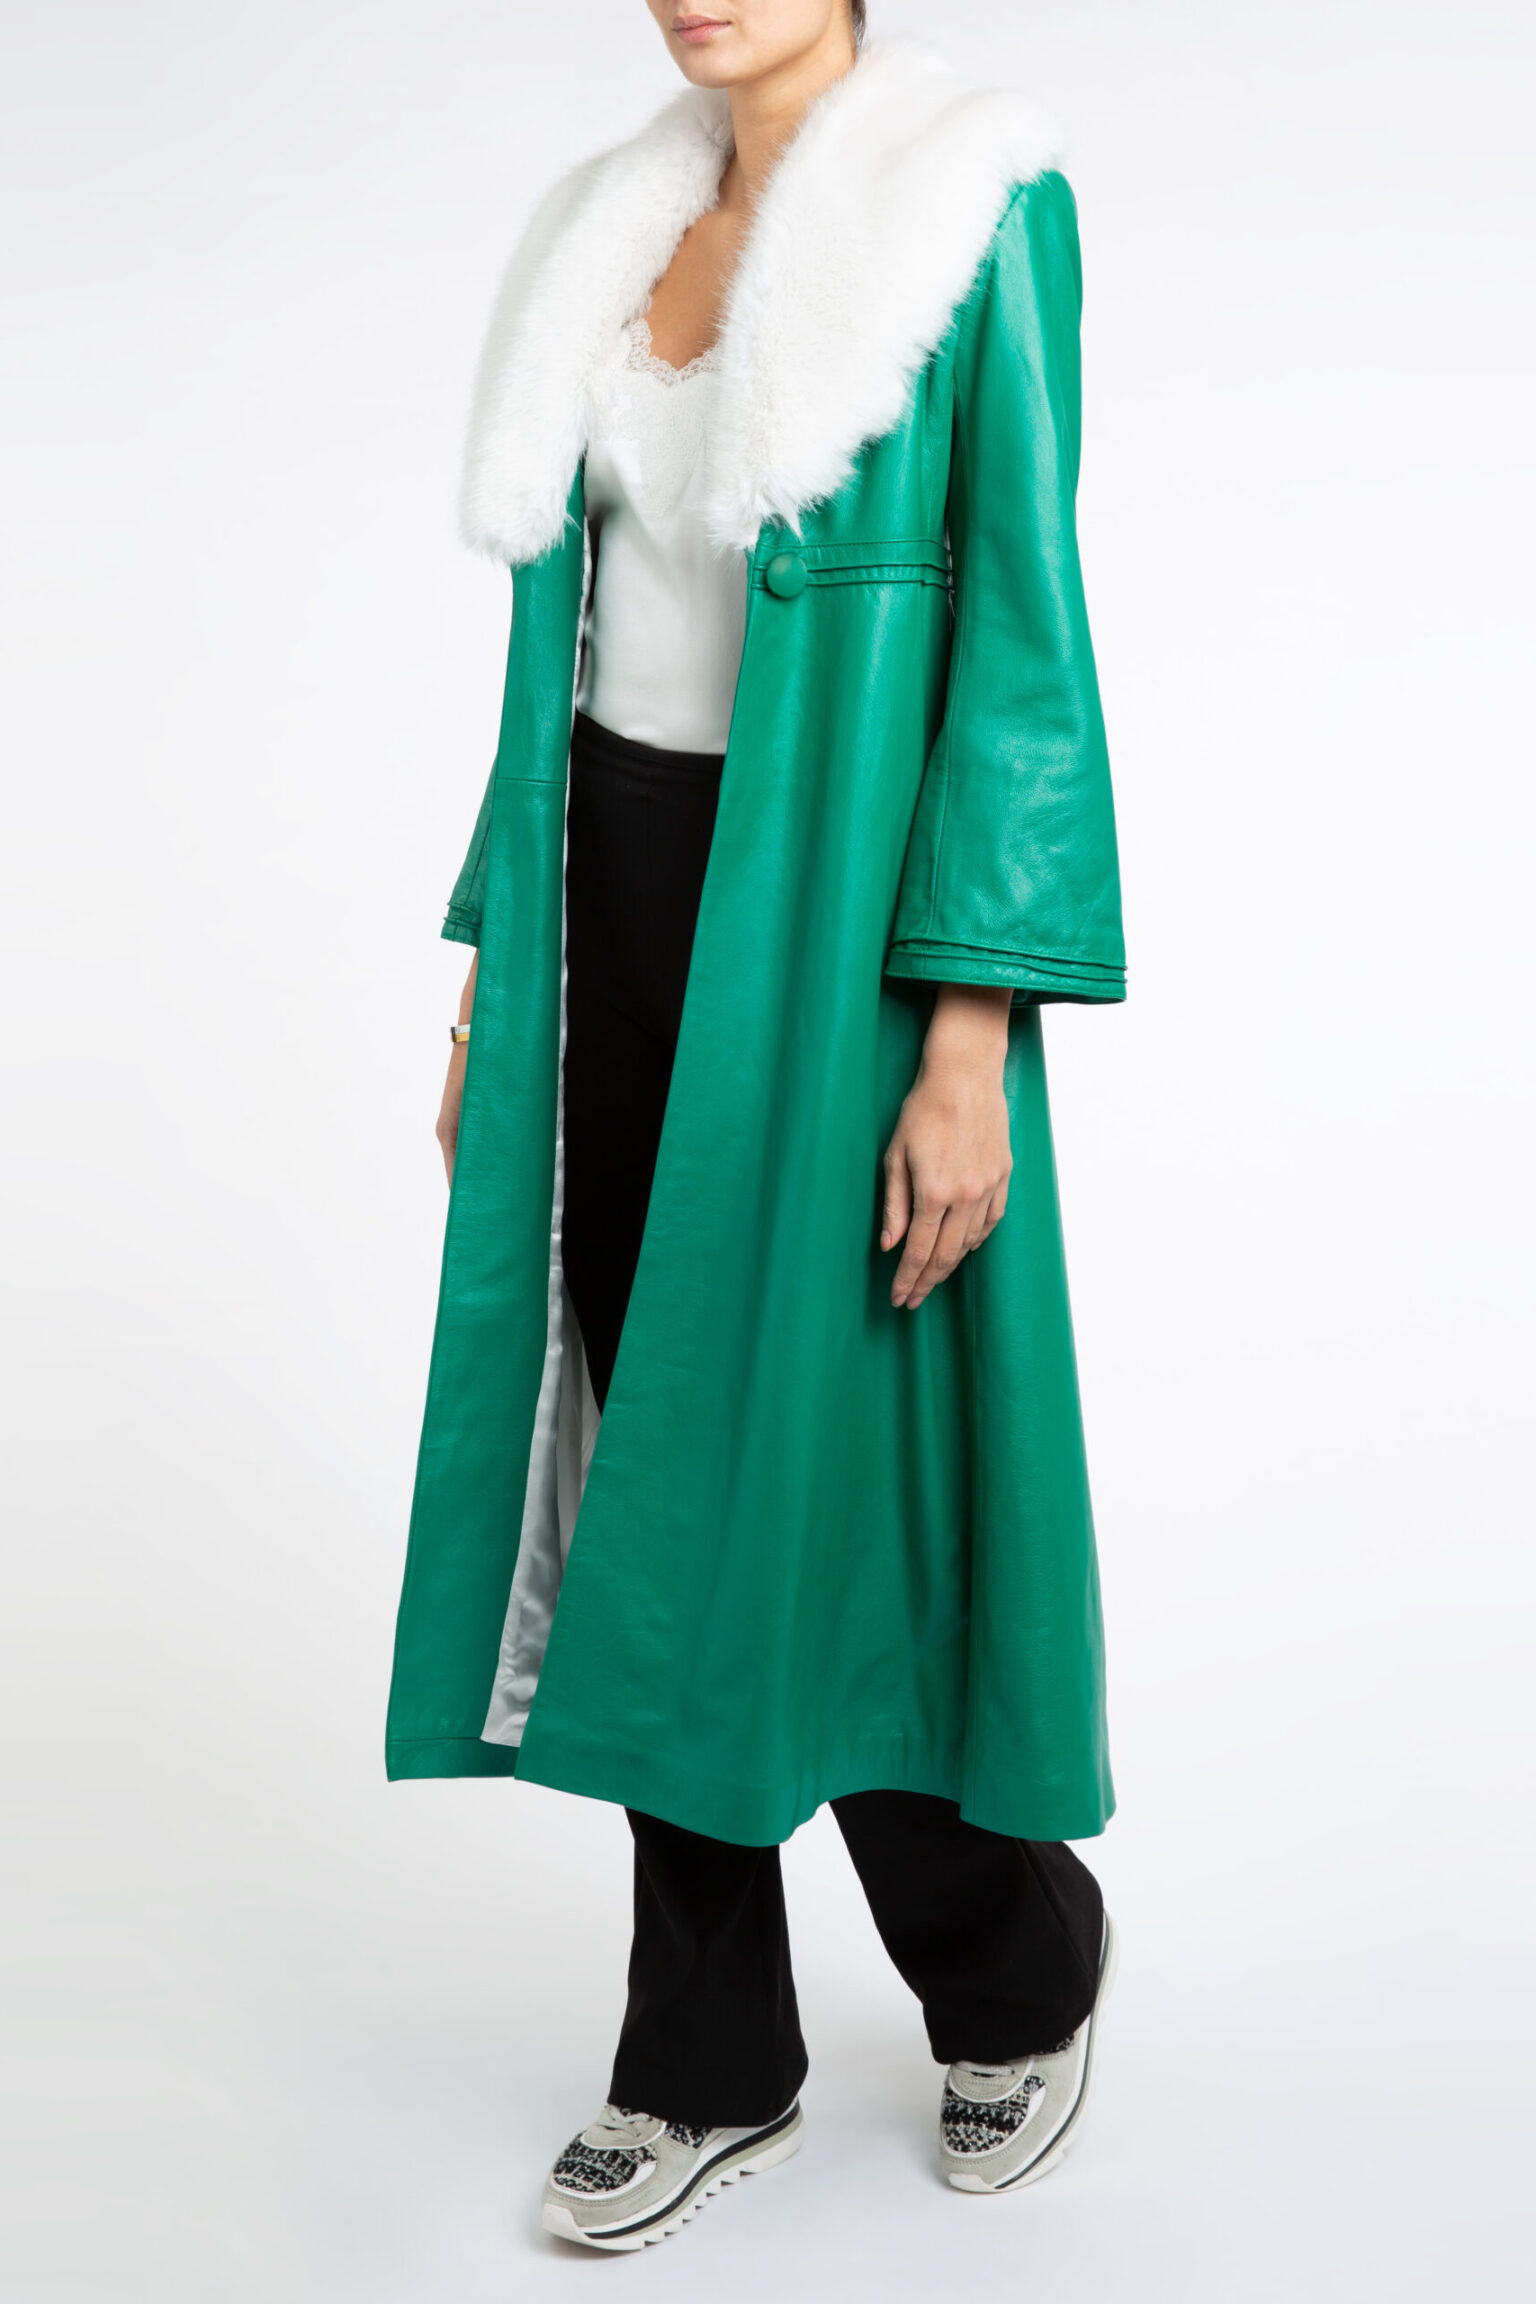 Edward Leather Trench Coat in Green and White -SOLD OUT